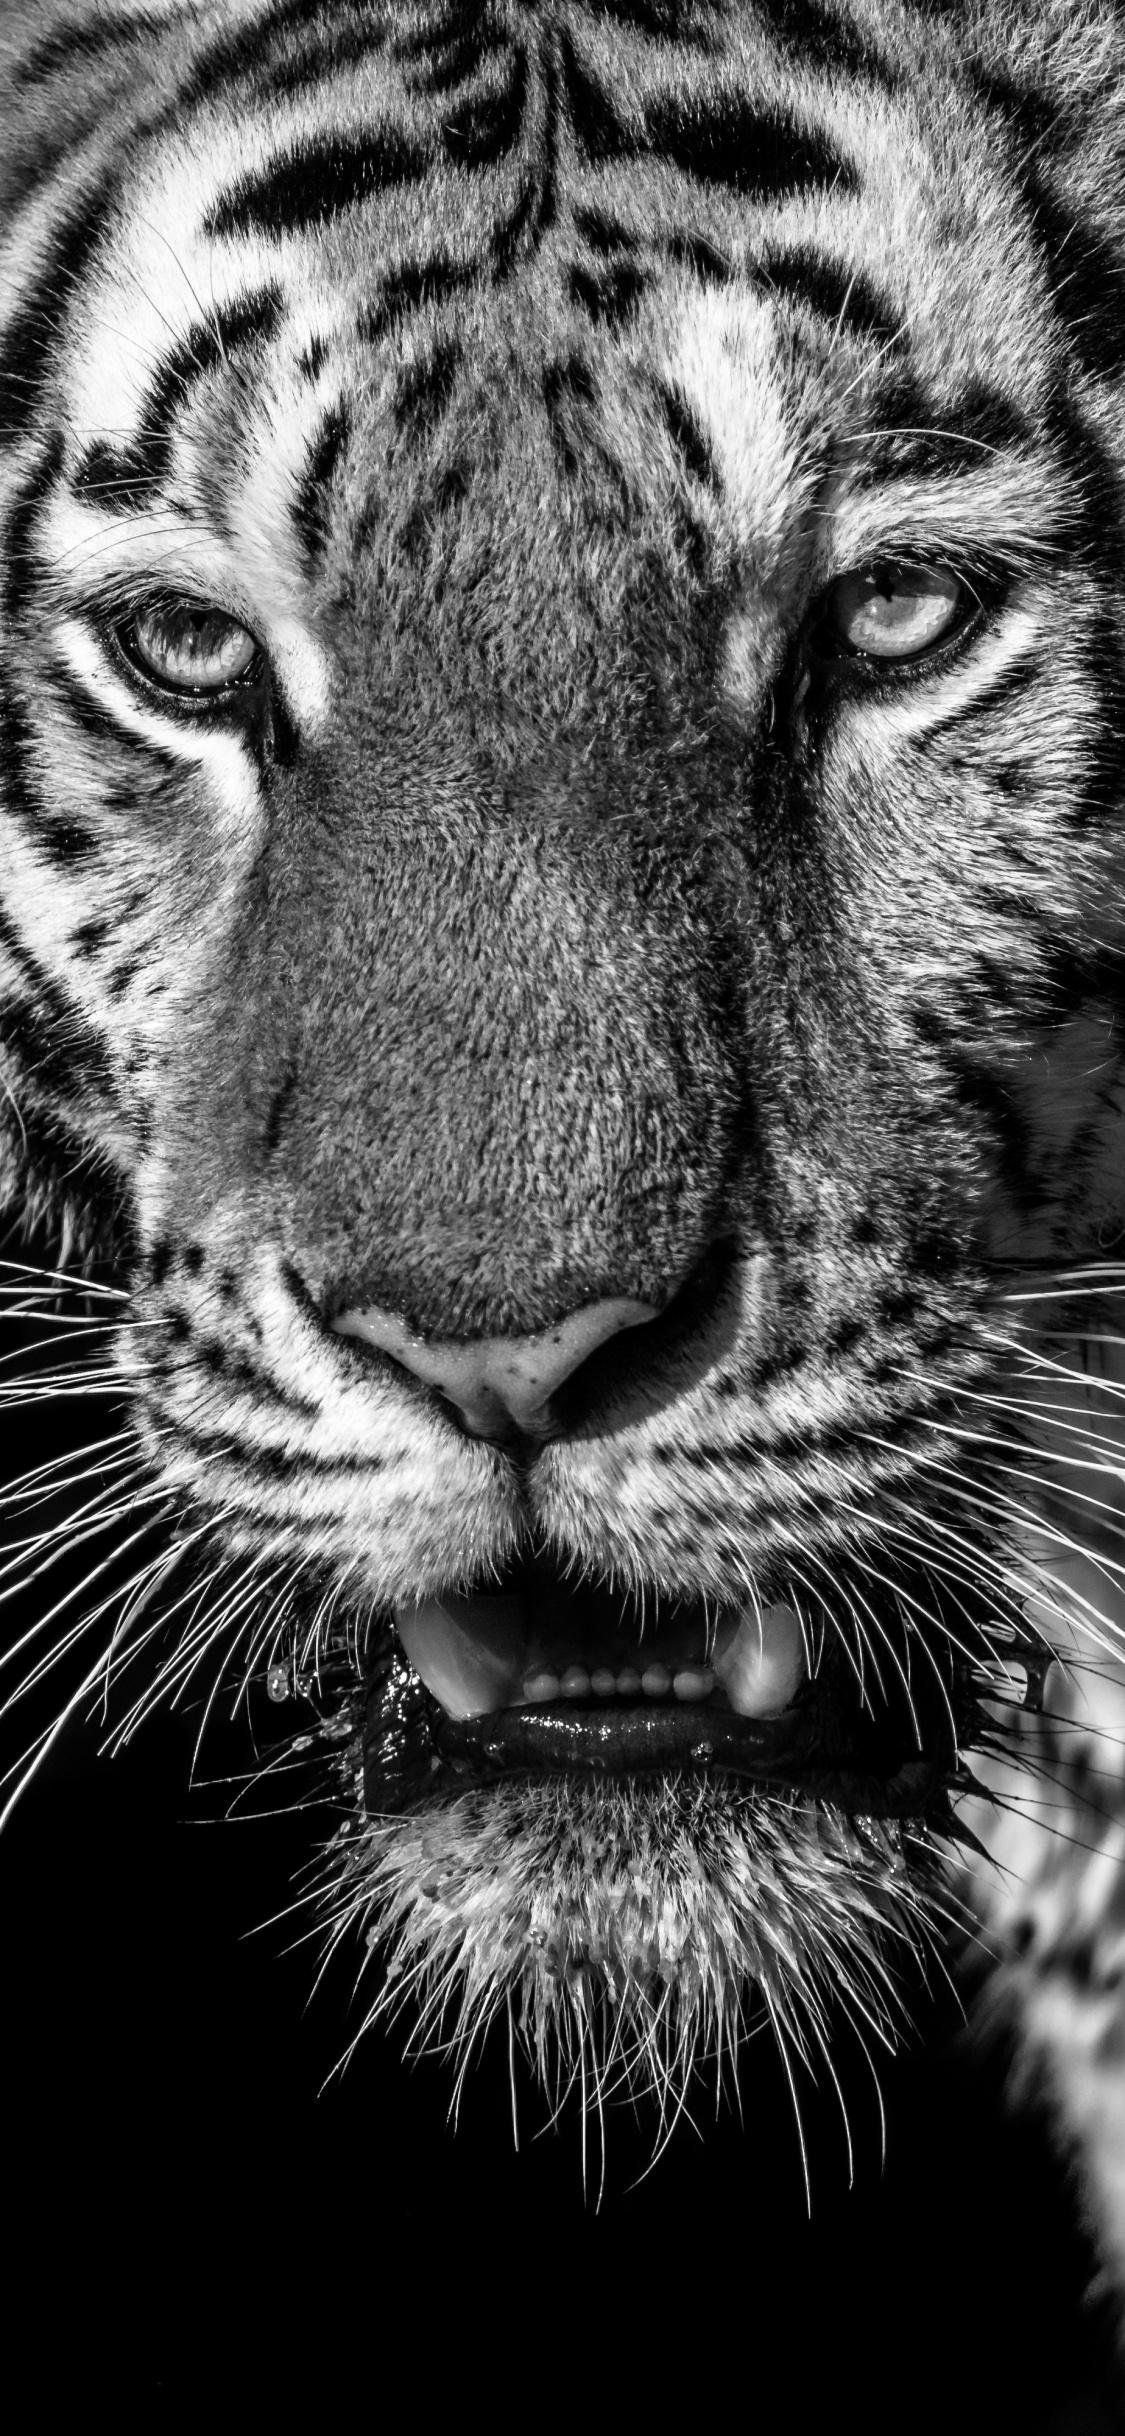 White and Black Tiger Illustration. Wallpaper in 1125x2436 Resolution